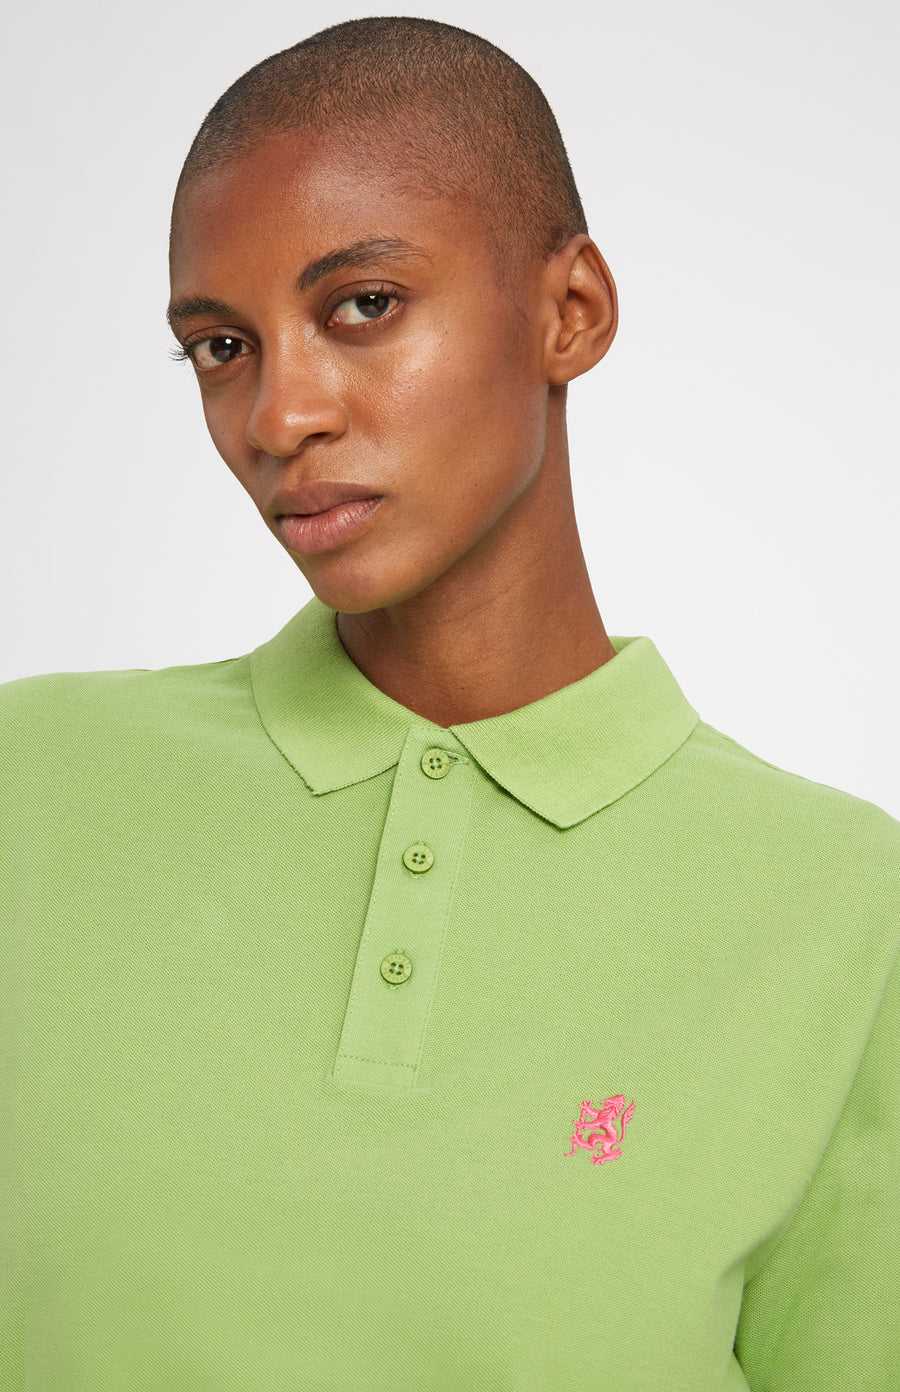 Cotton Heritage Golf Polo Shirt In Field Green on female model neck detail - Pringle of Scotland